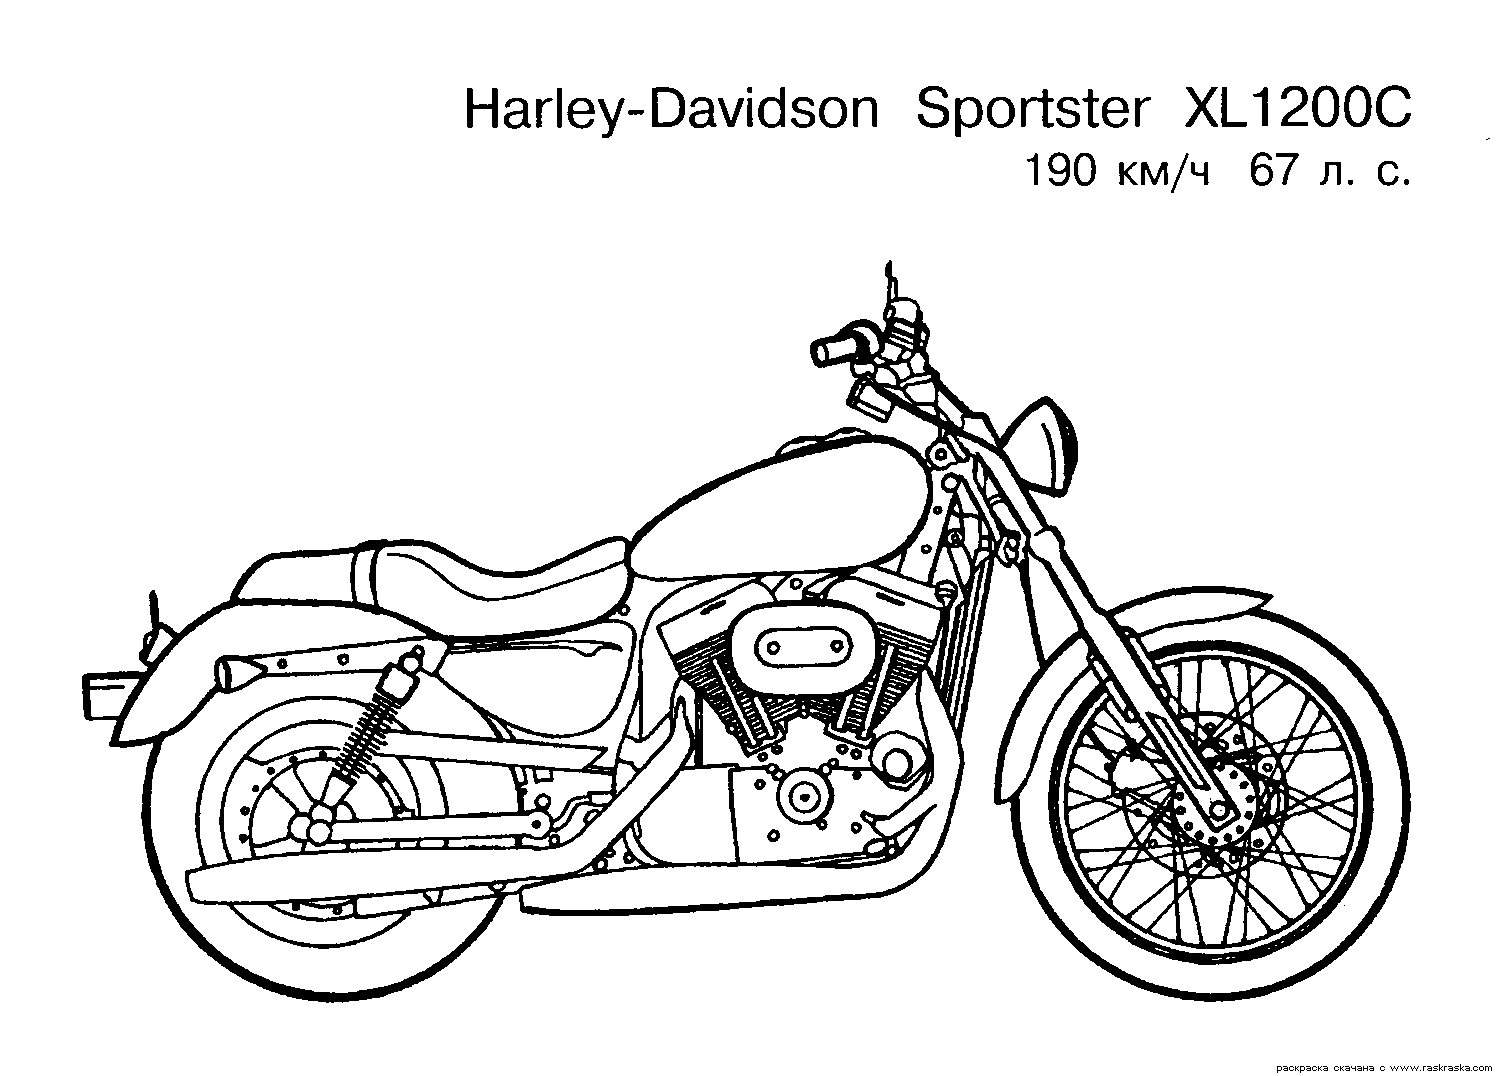 Free Motorcycle coloring page, letscoloringpages.com, Harley-Davidson Sportster XL 1200C